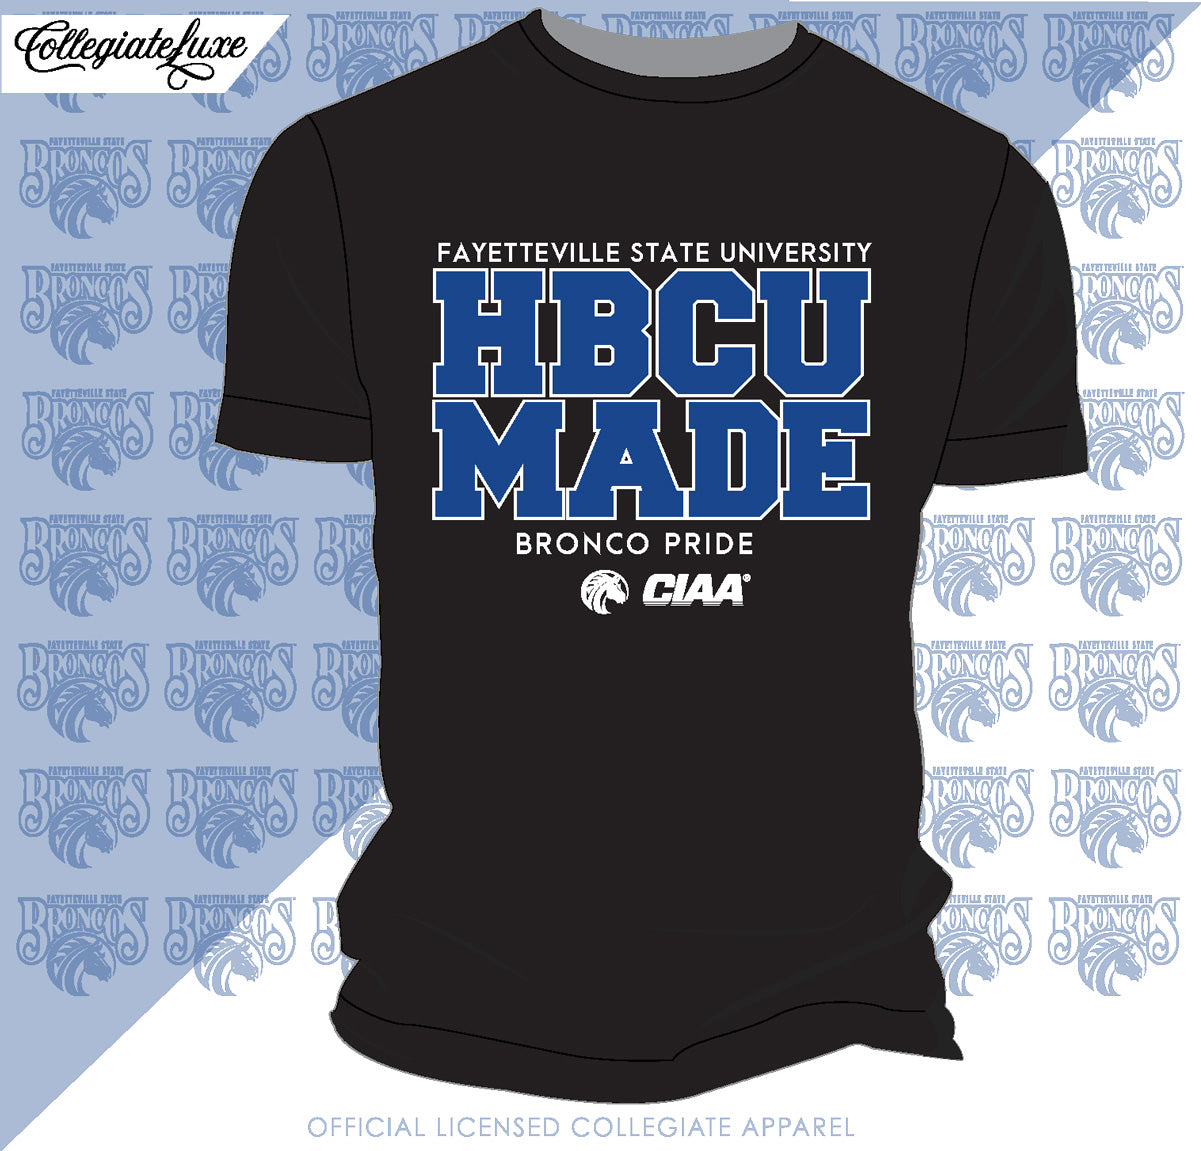 Fayetteville State | HBCU MADE Black unisex tees (Z)